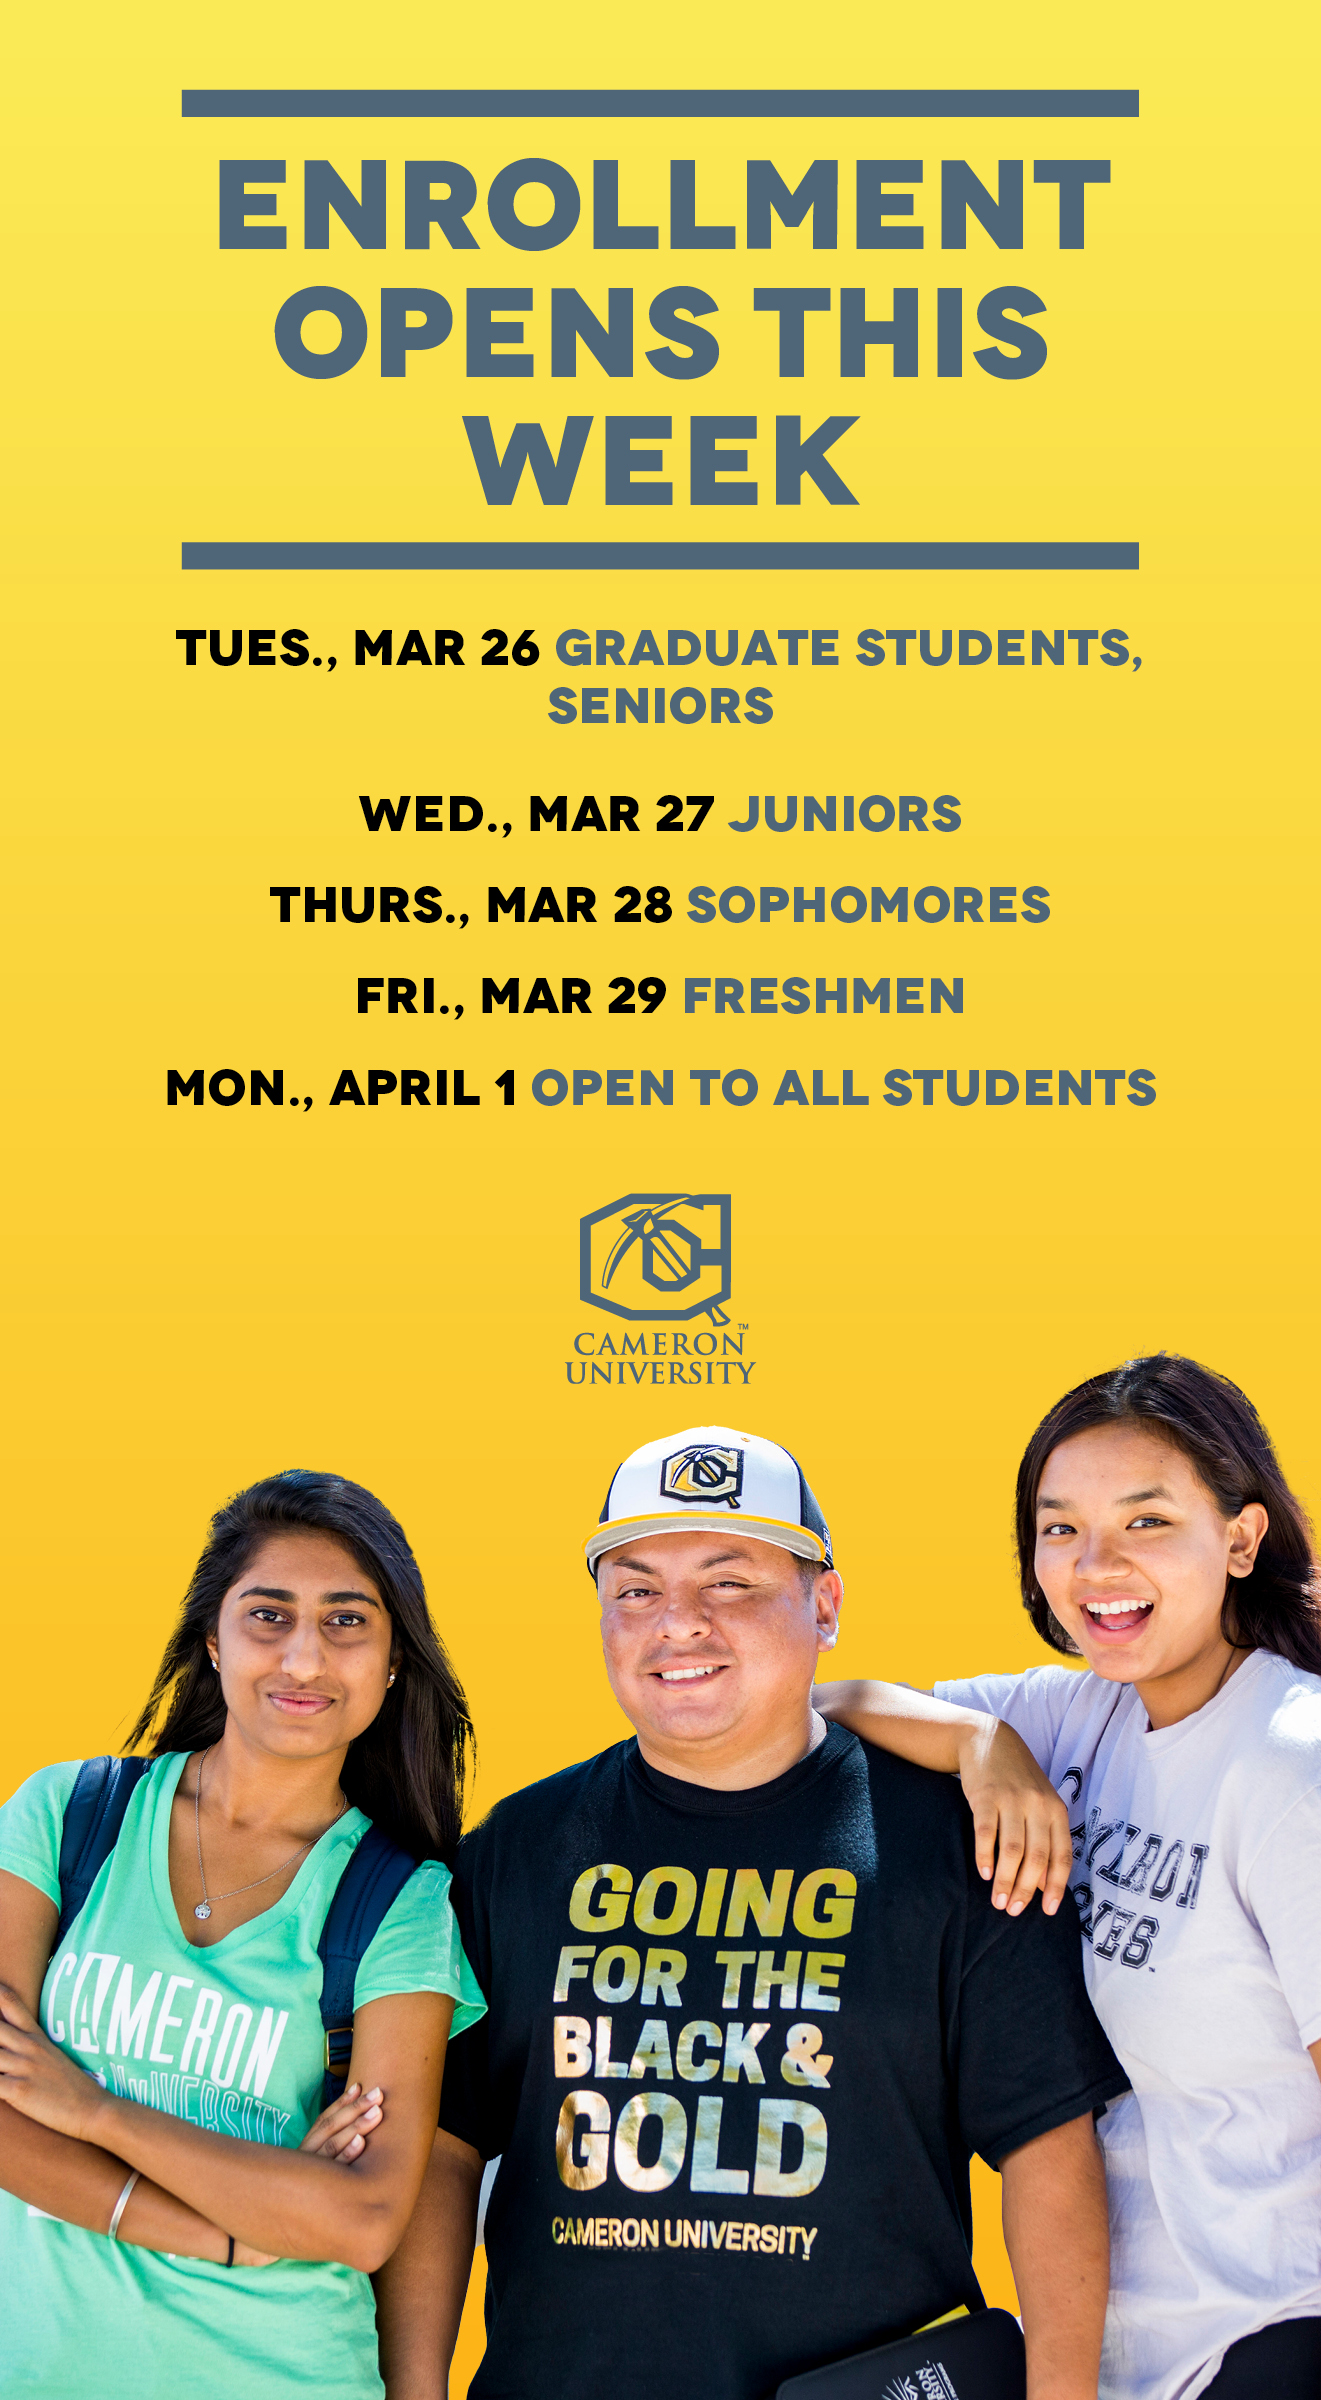 Enrollment opens this week
Tues March 26, graduate students, seniors
Wed March 27, juniors
Thur March 28, sophomores
Fri March 29, freshmen
Mon April 1 open to all students